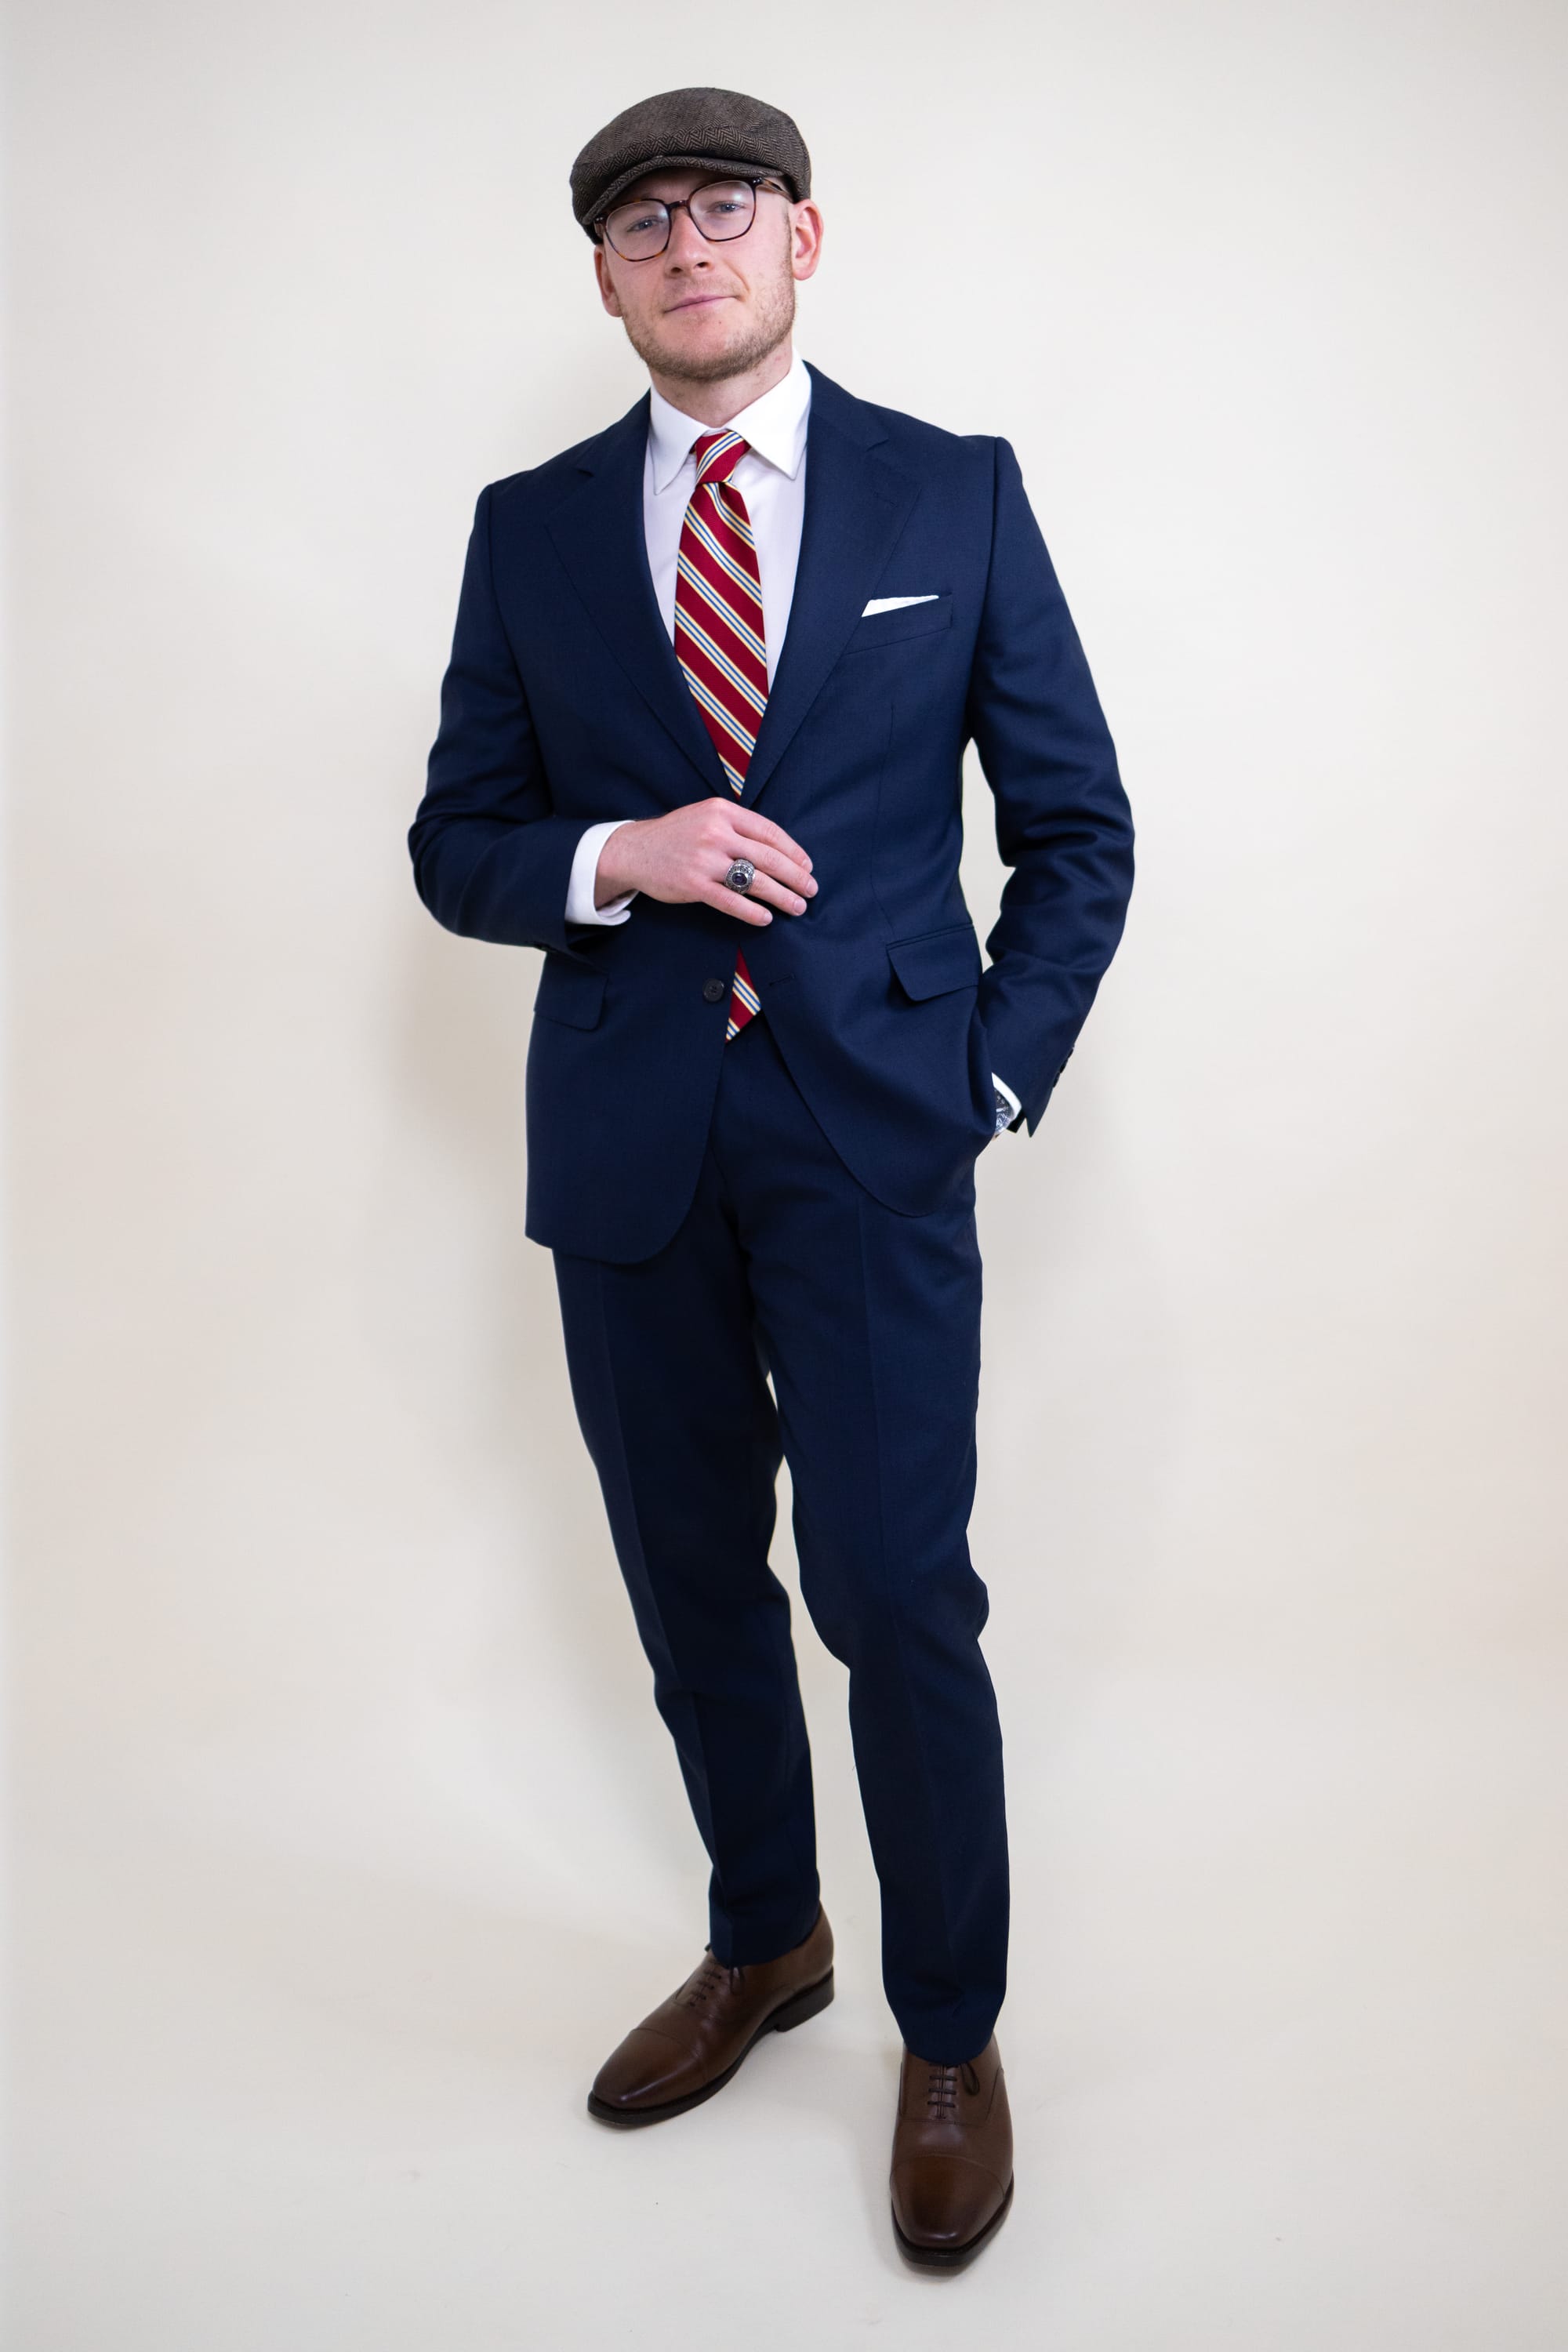 How to Wear a Navy Blue Suit (6 Outfit Ideas for Men)